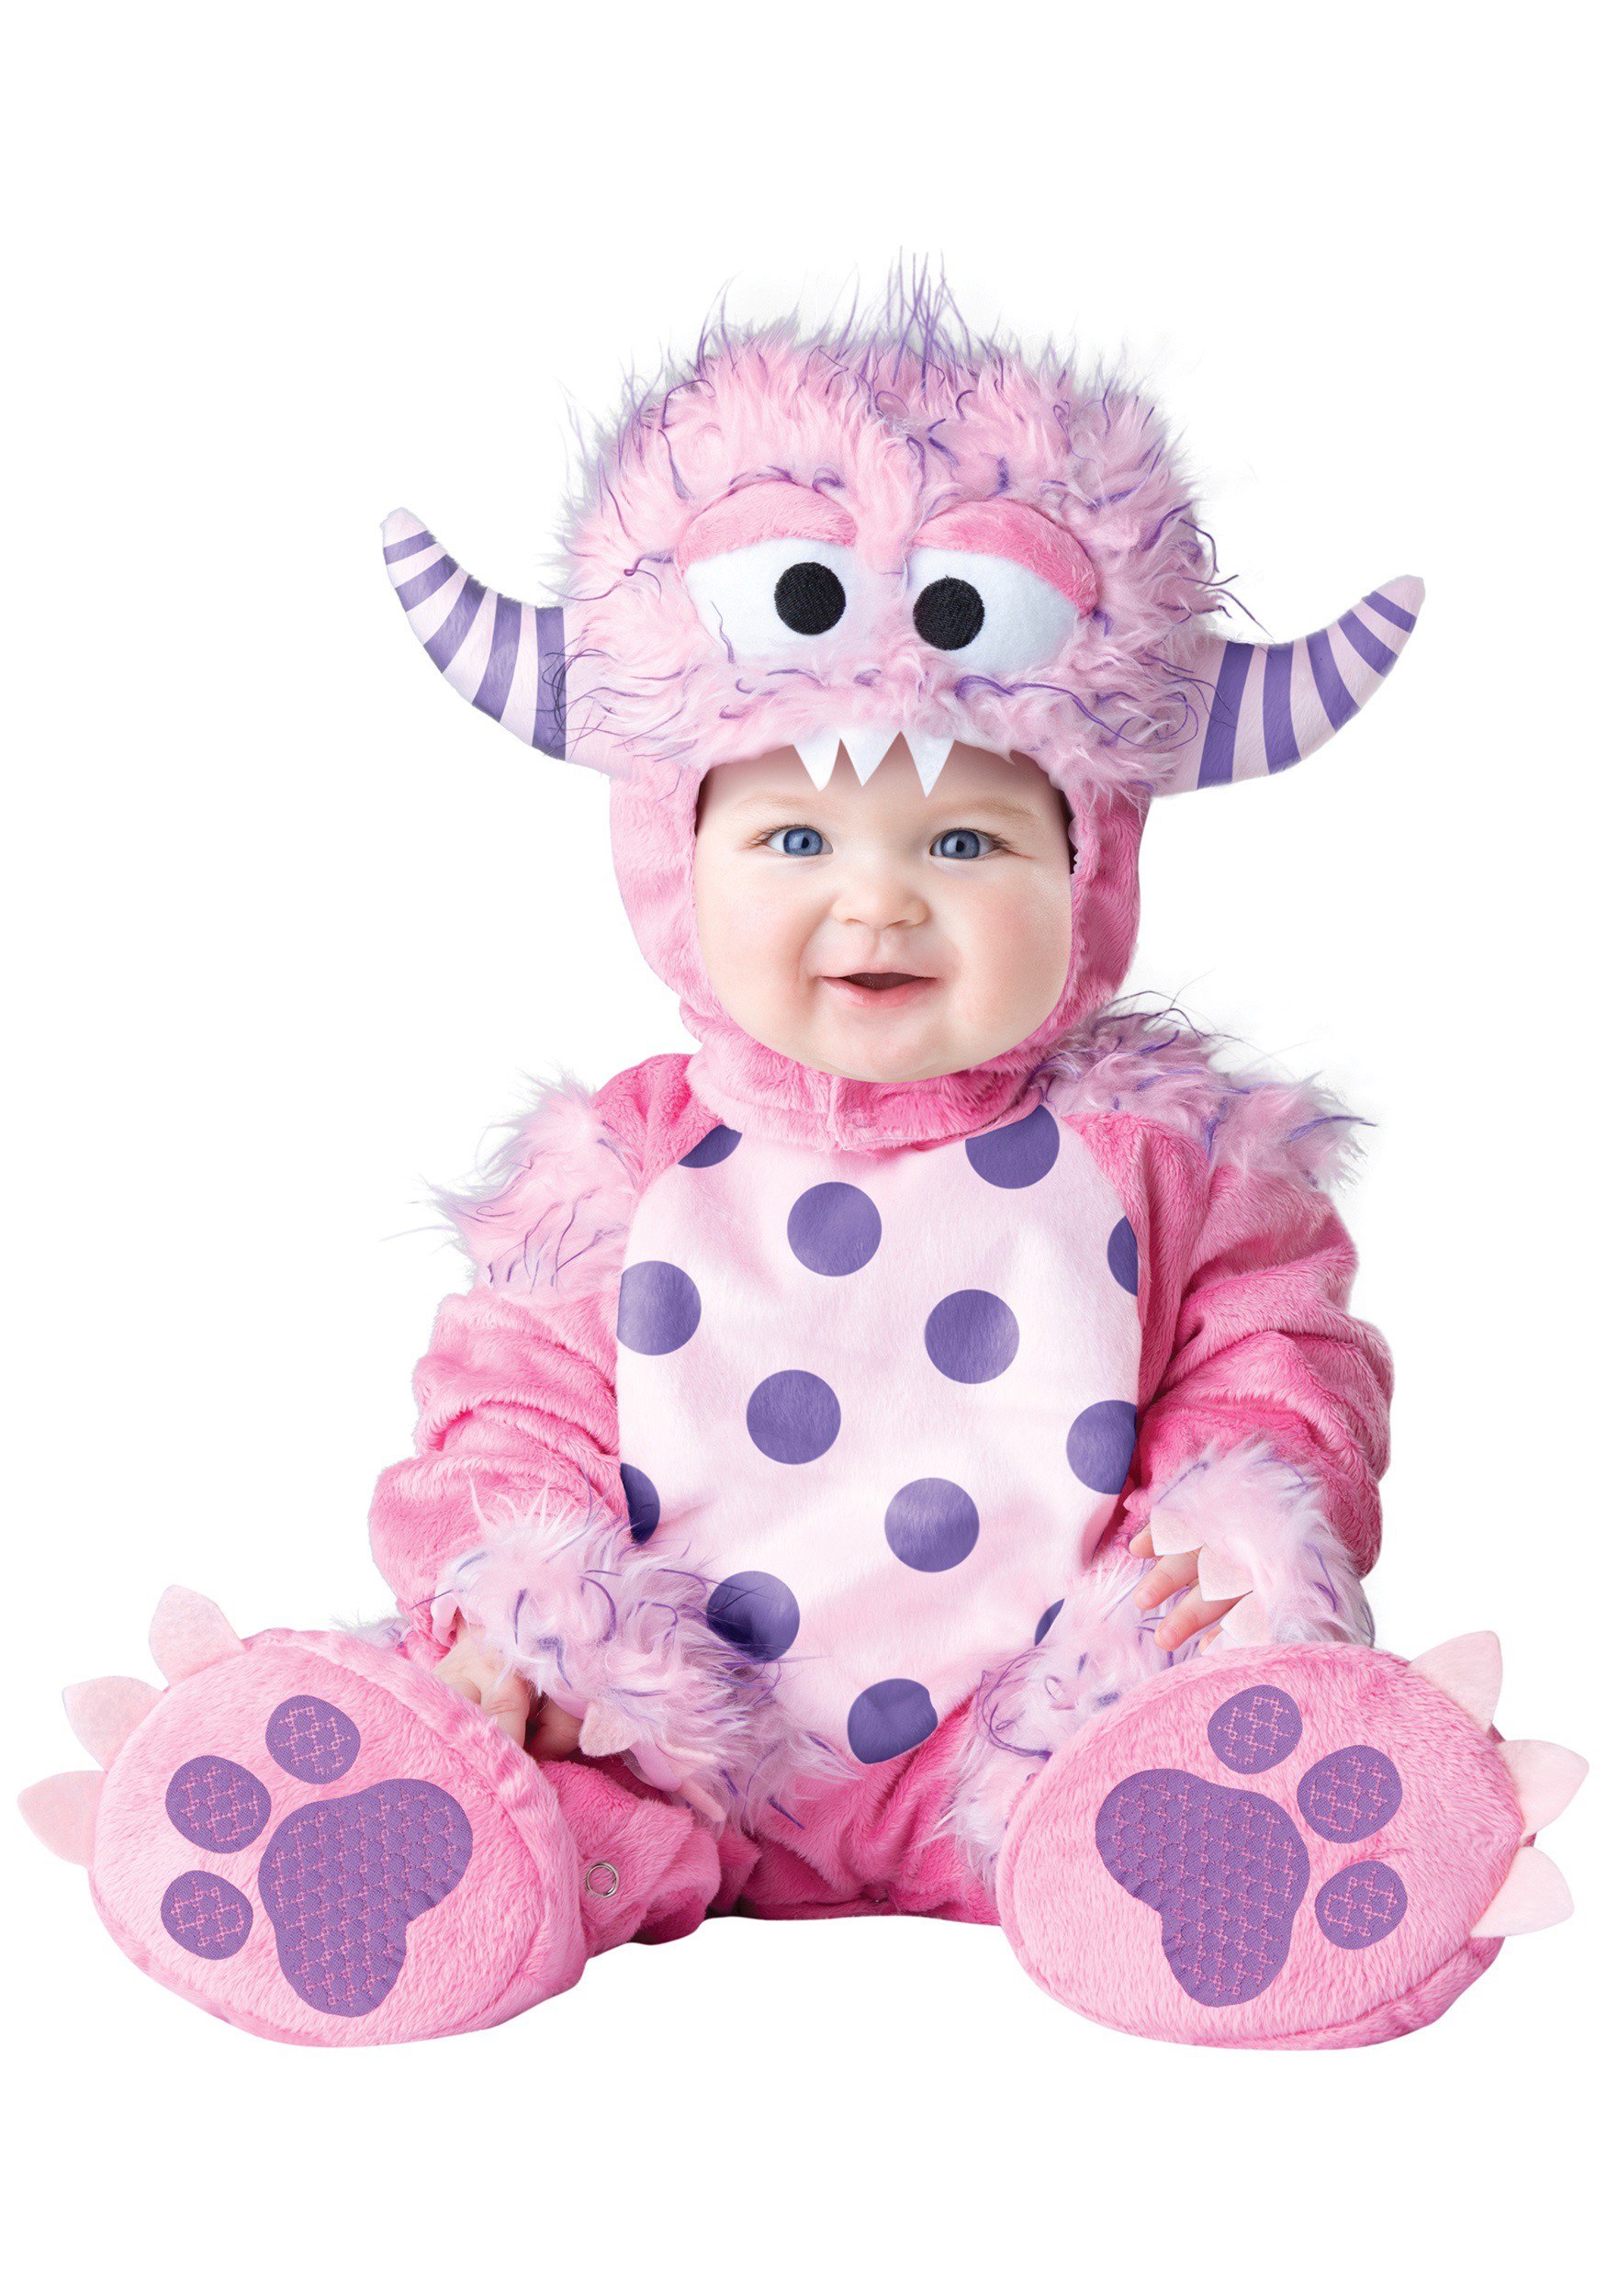 Image of Infant/Toddler Lil Pink Monster Costume ID IN6068-M